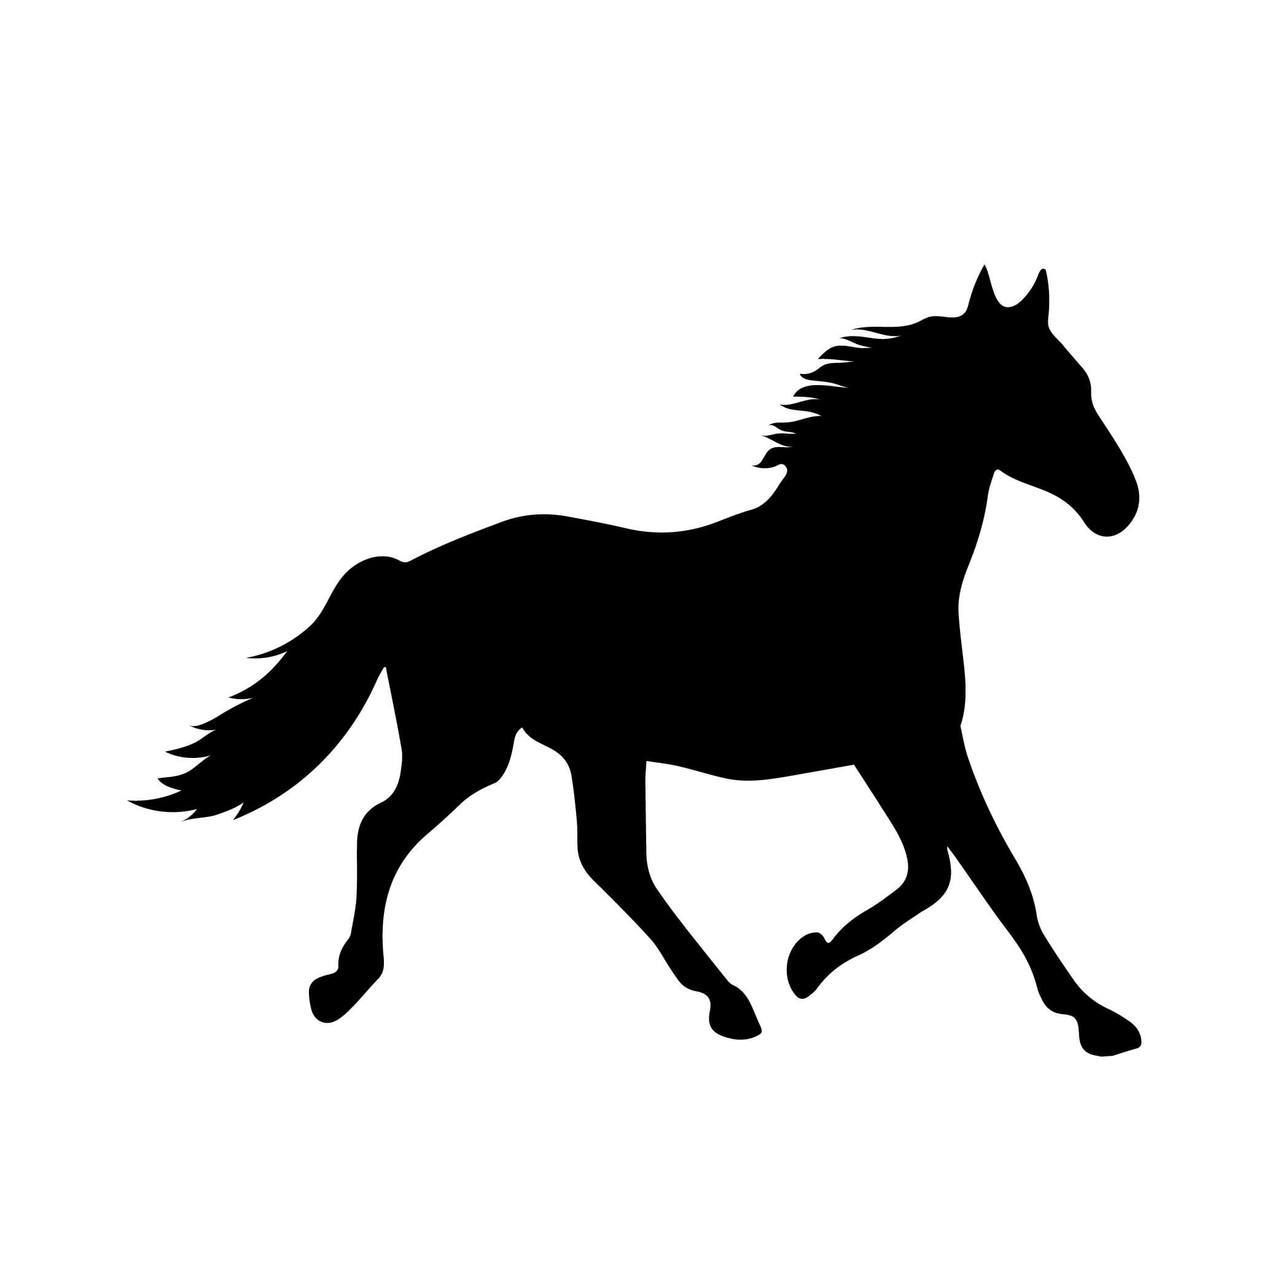 Horse Silhouette Svg at GetDrawings | Free download